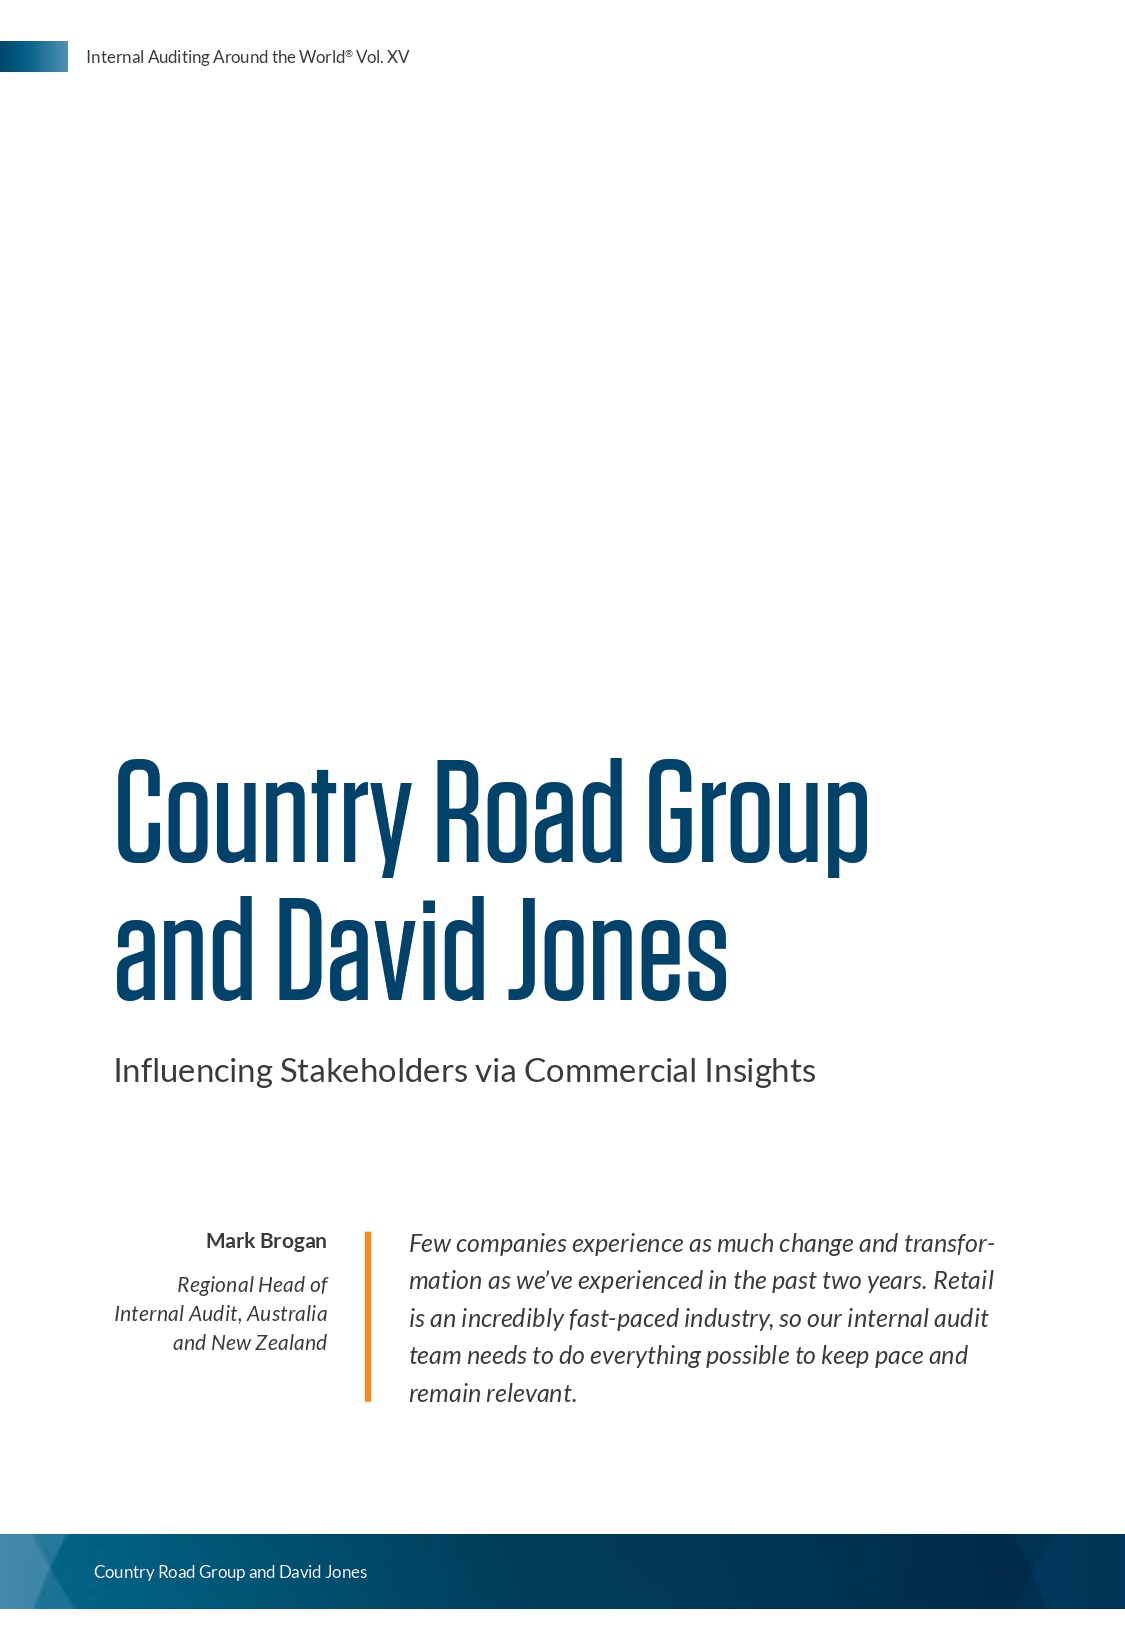 Screenshot of the first page of Country Road Group and David Jones: Influencing Stakeholders via Commercial Insights